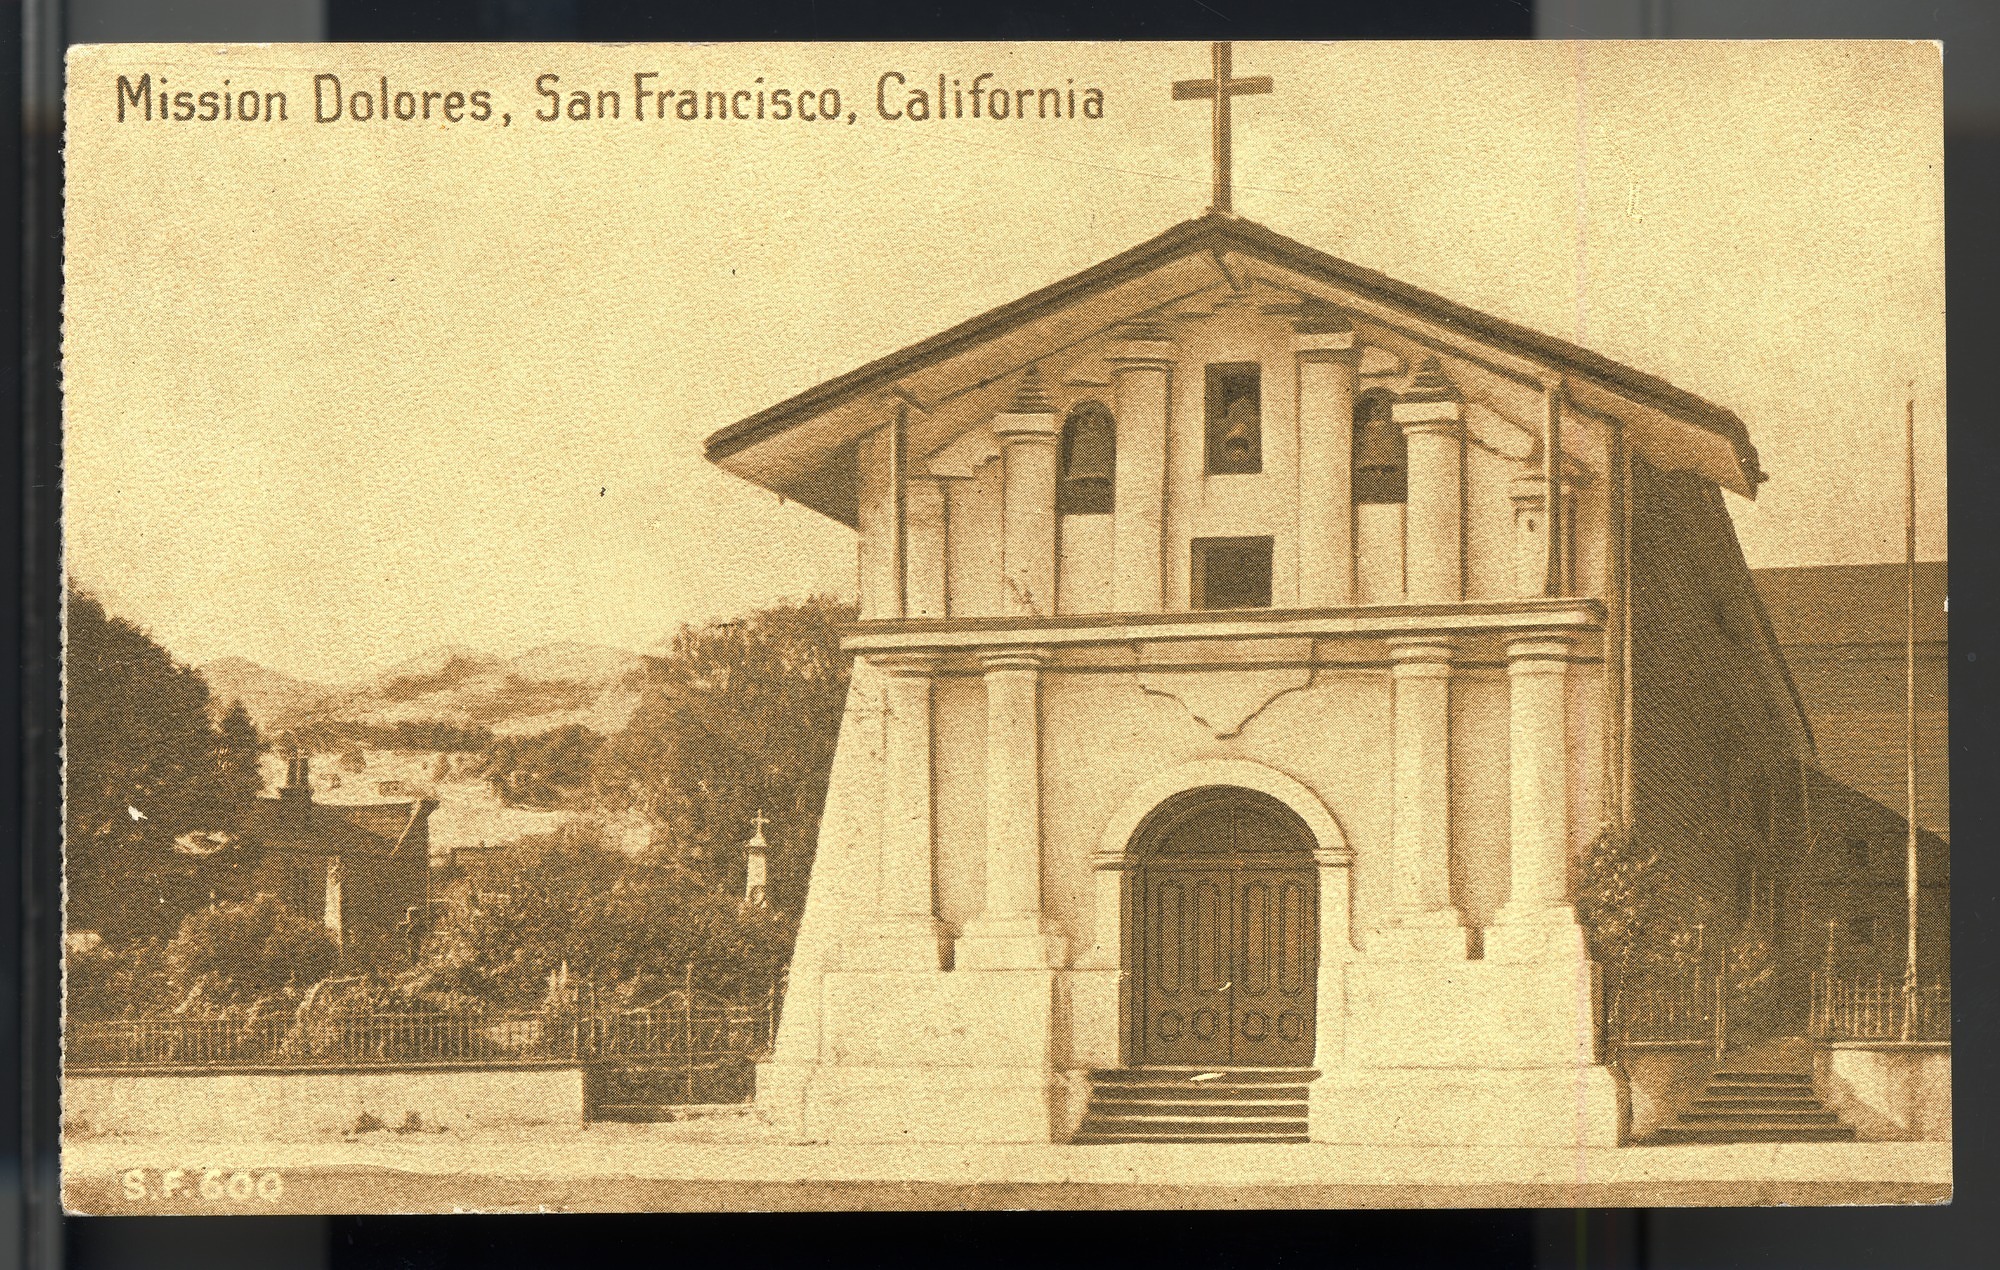 Postcard 23 – Mission Dolores, San Francisco, California. Cardinell-Vincent Company. ca 1910 or 1915. NMAH 1986.0639.0406.